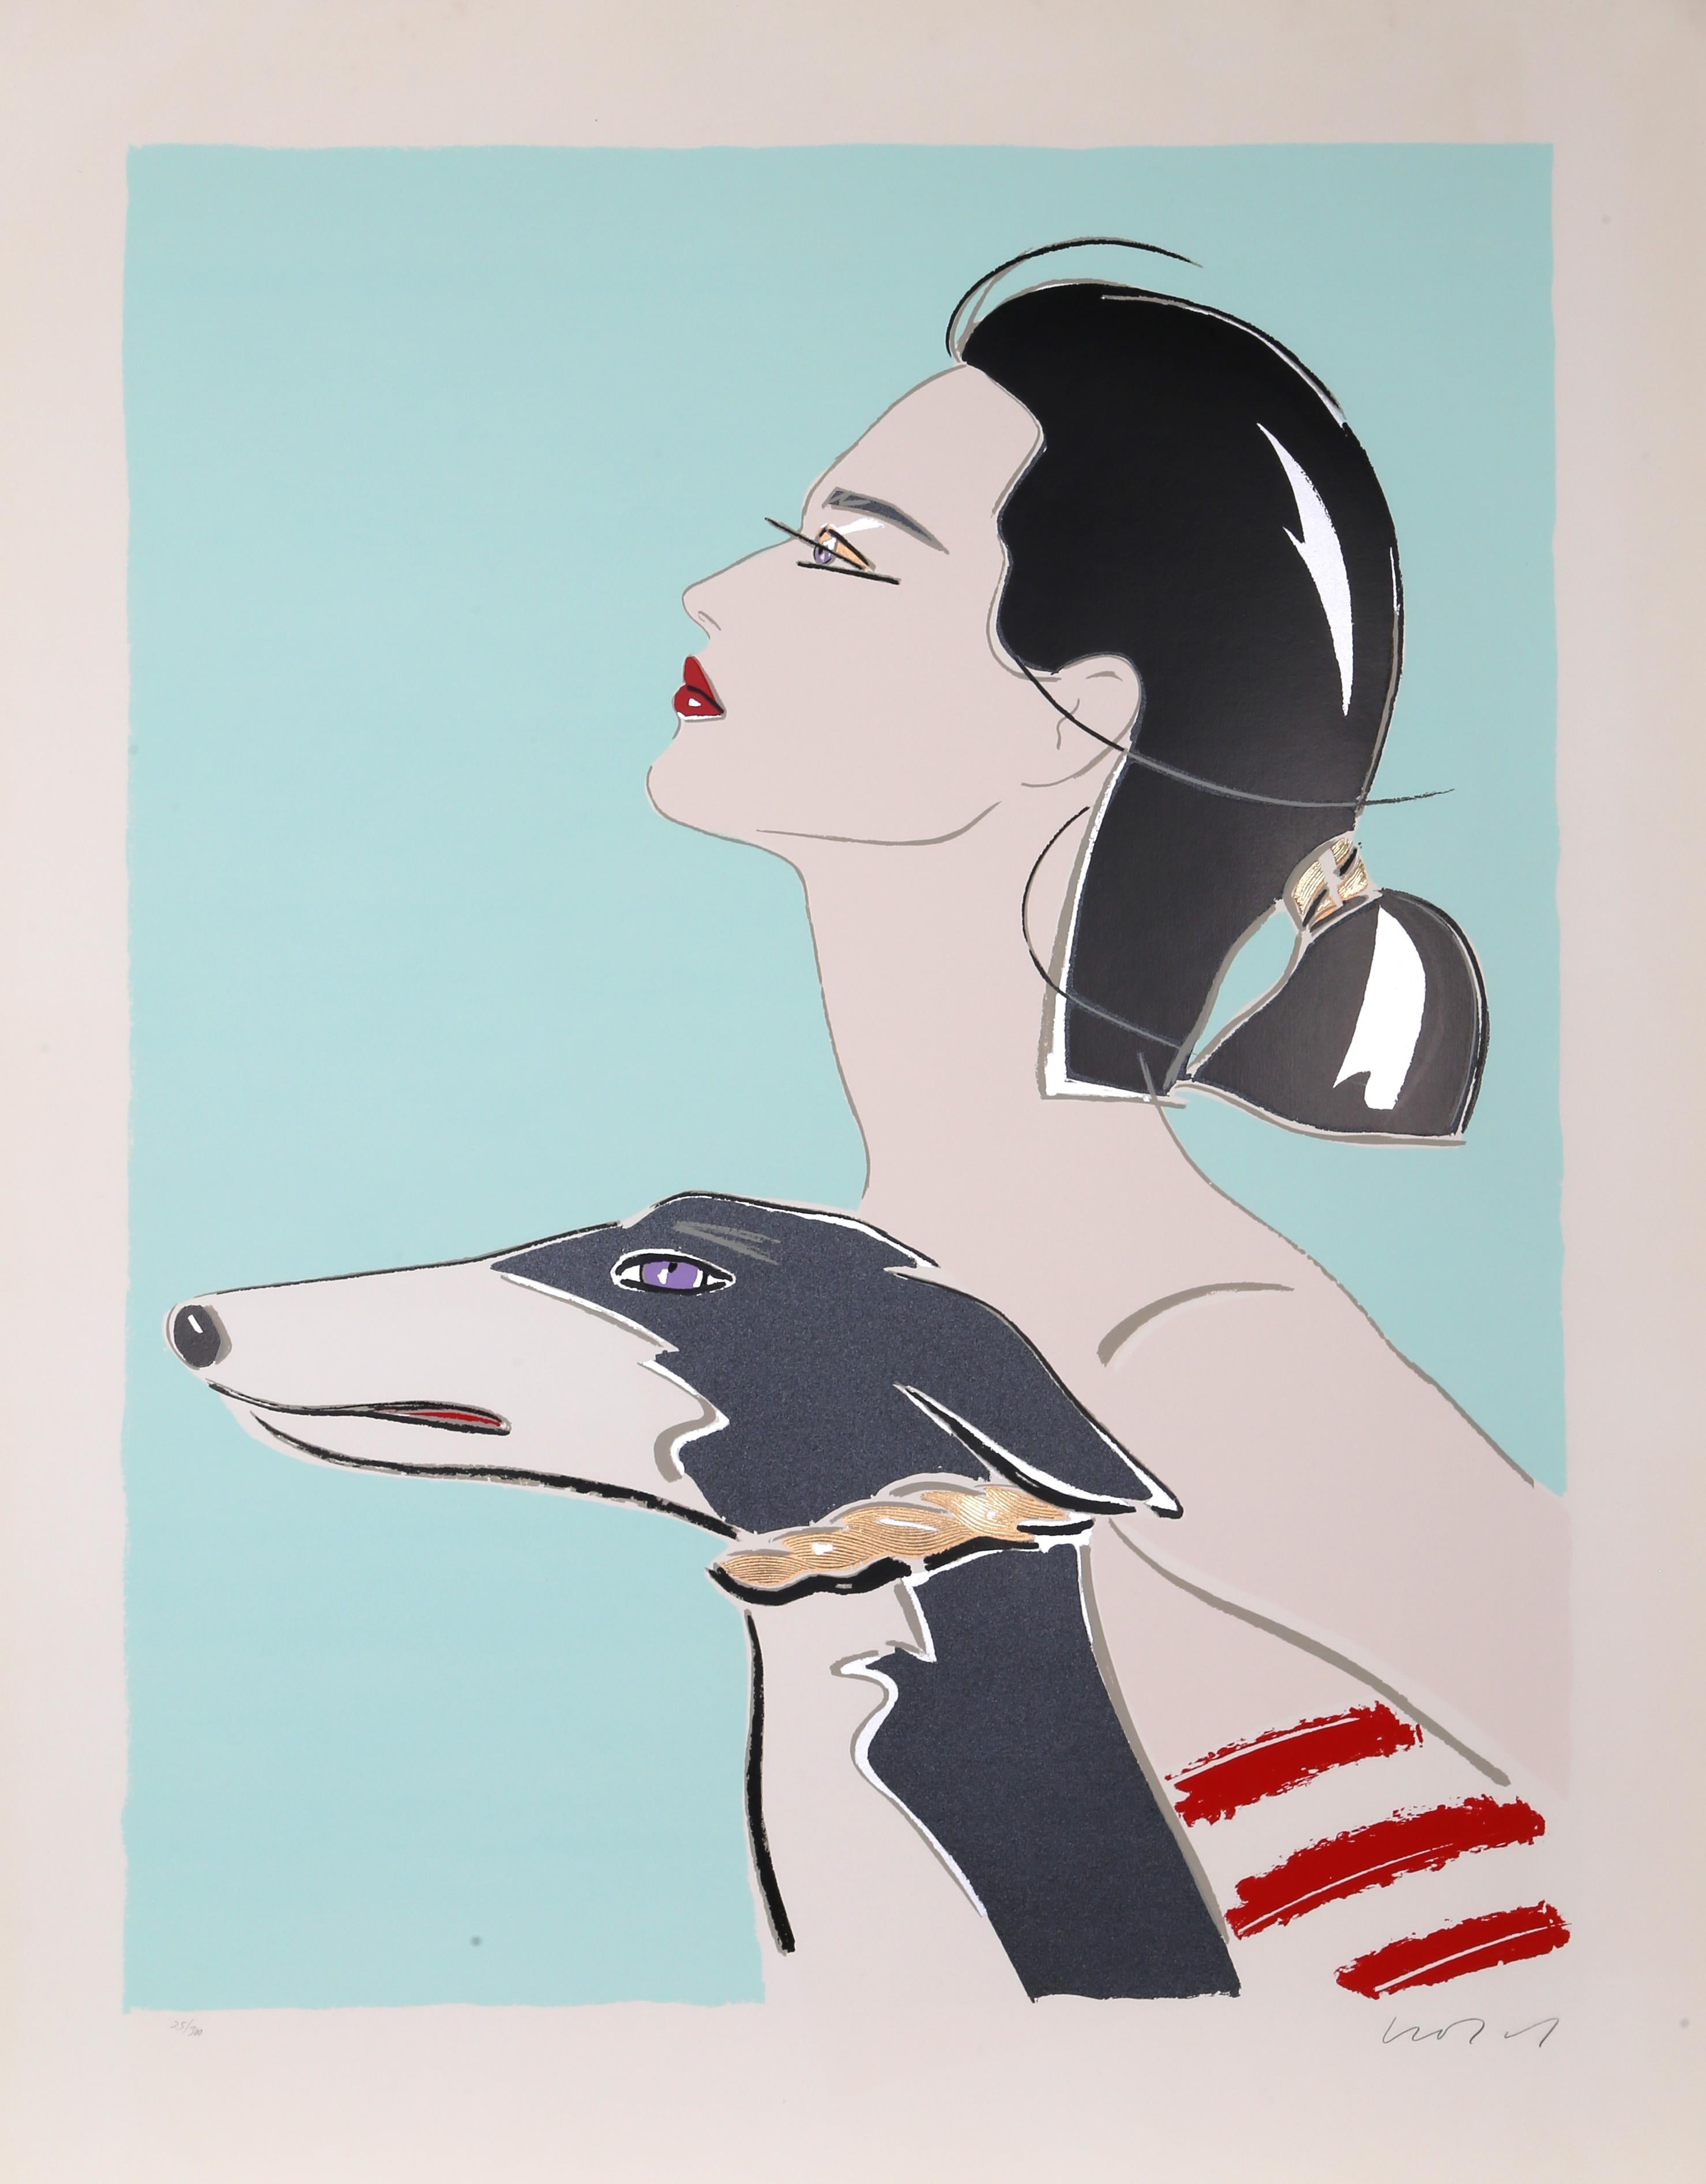 What type of art does Patrick Nagel create?